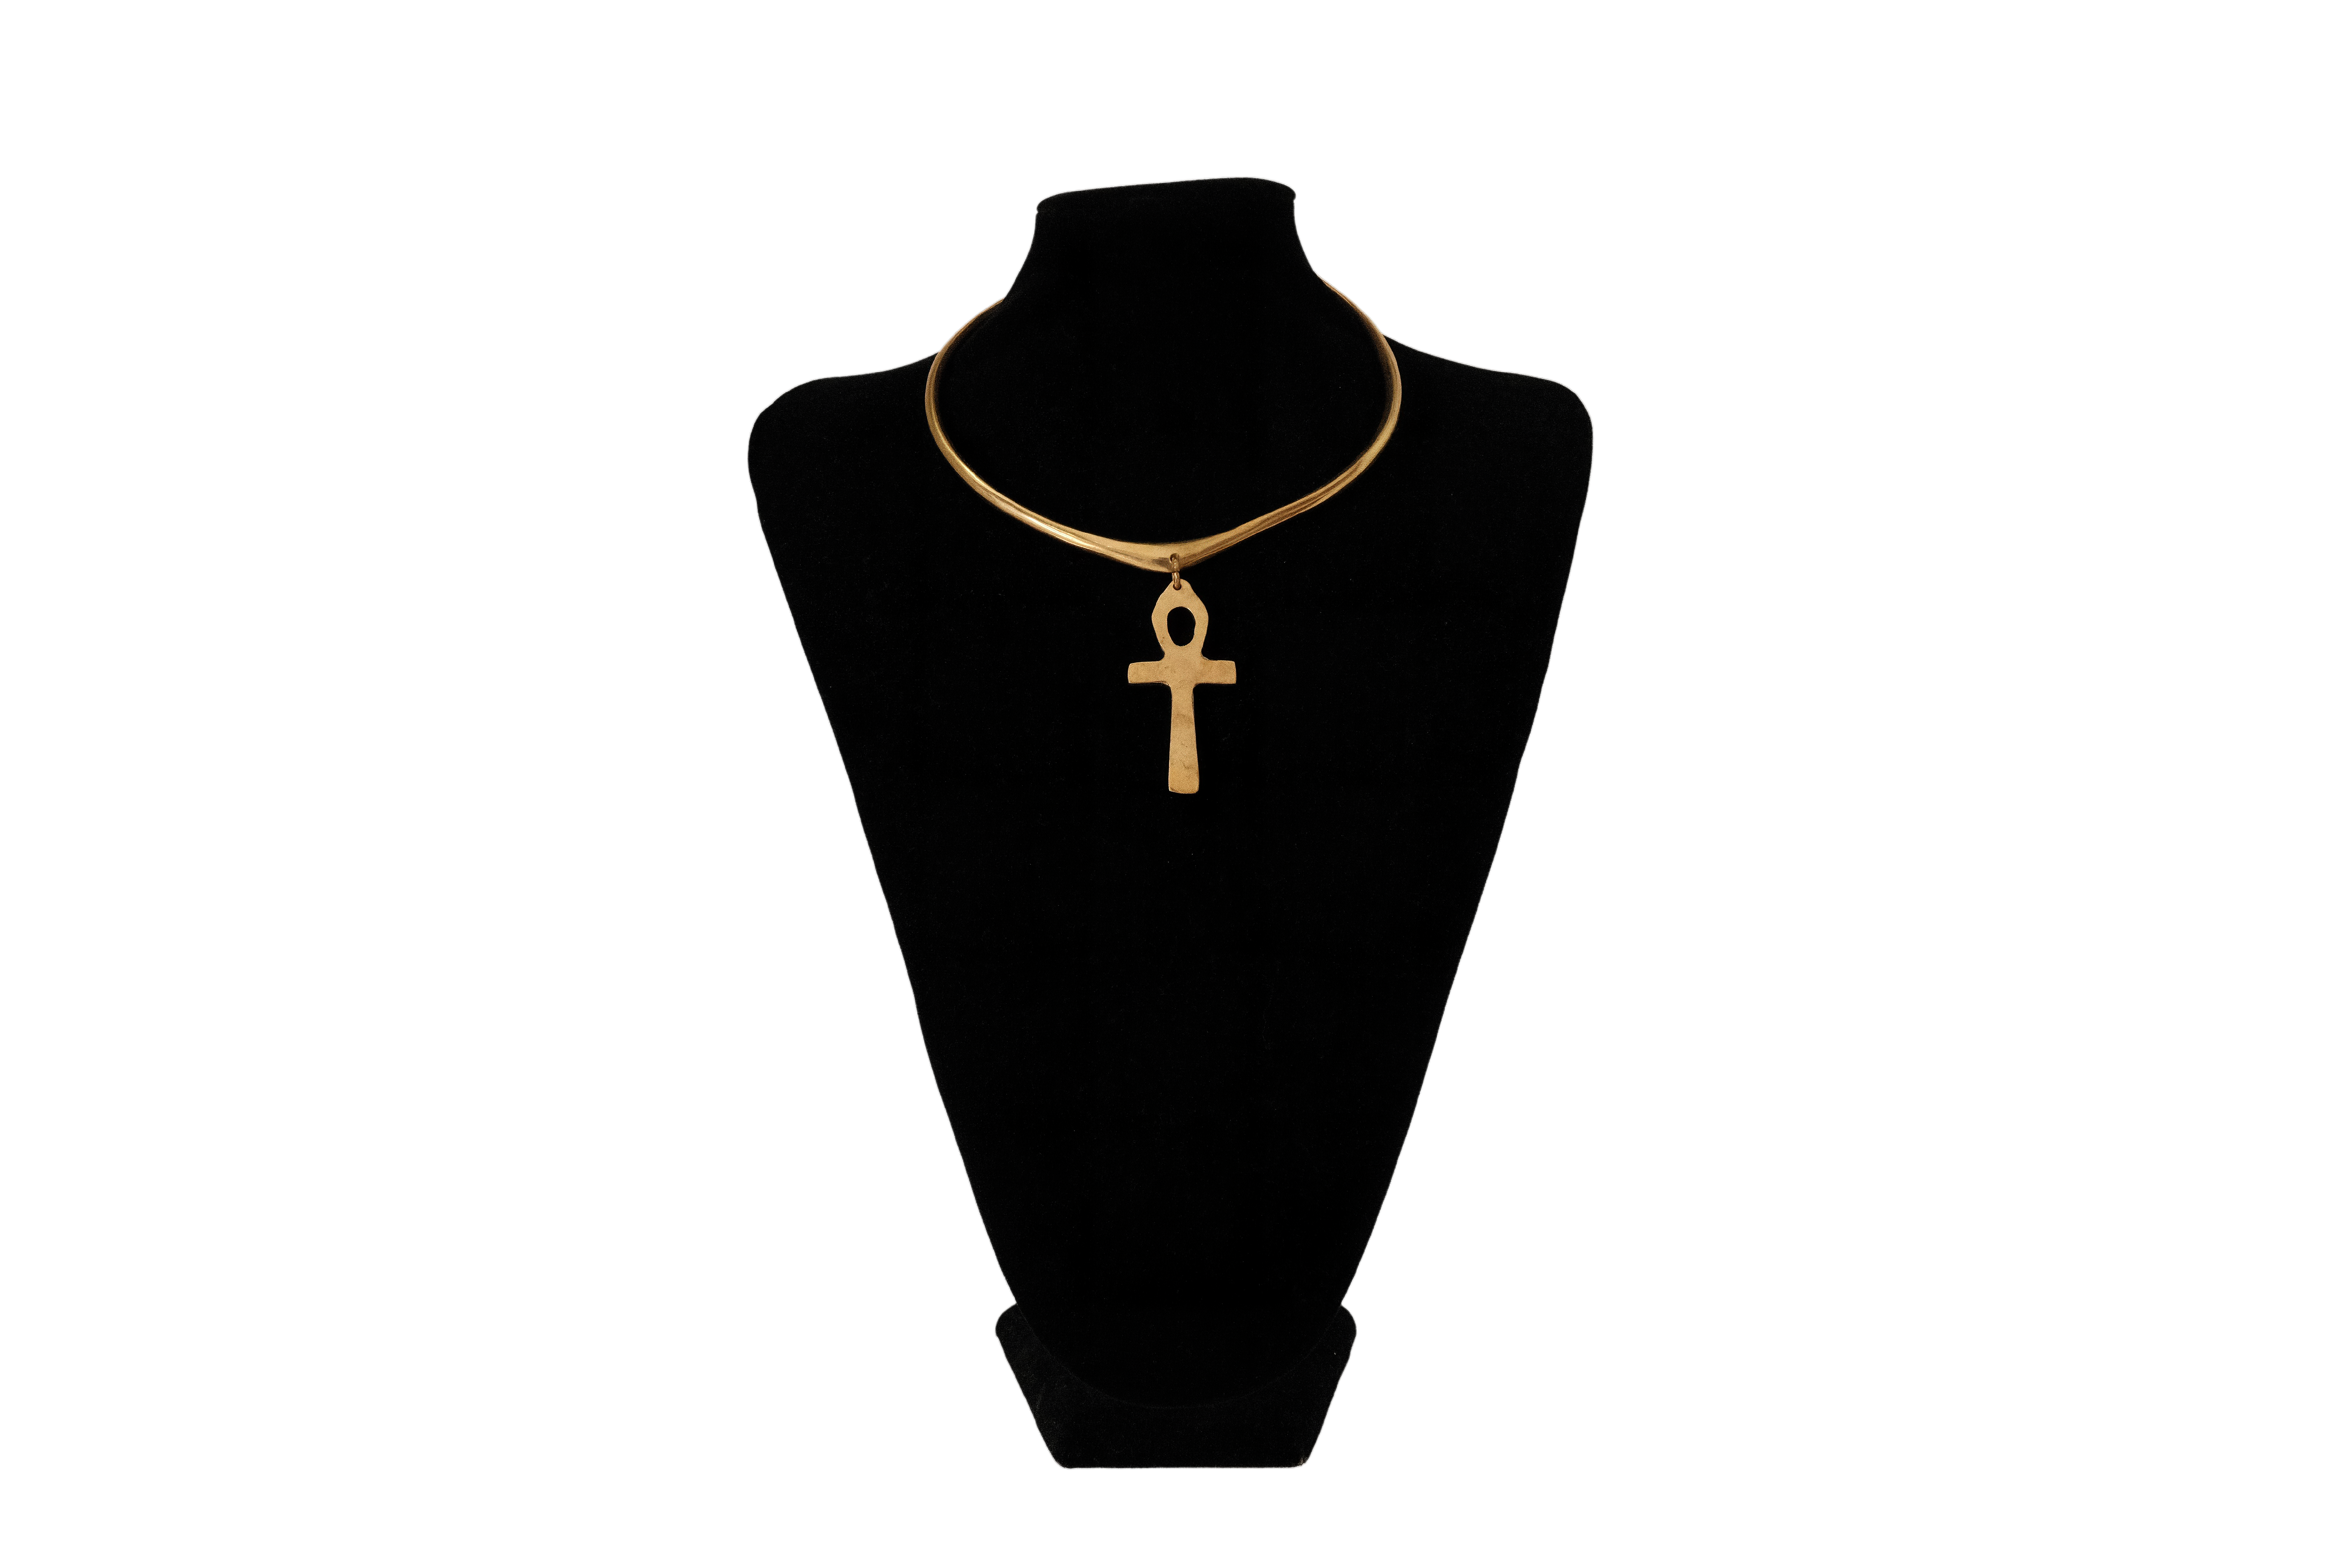 Brass Necklace with Ankh Pendant